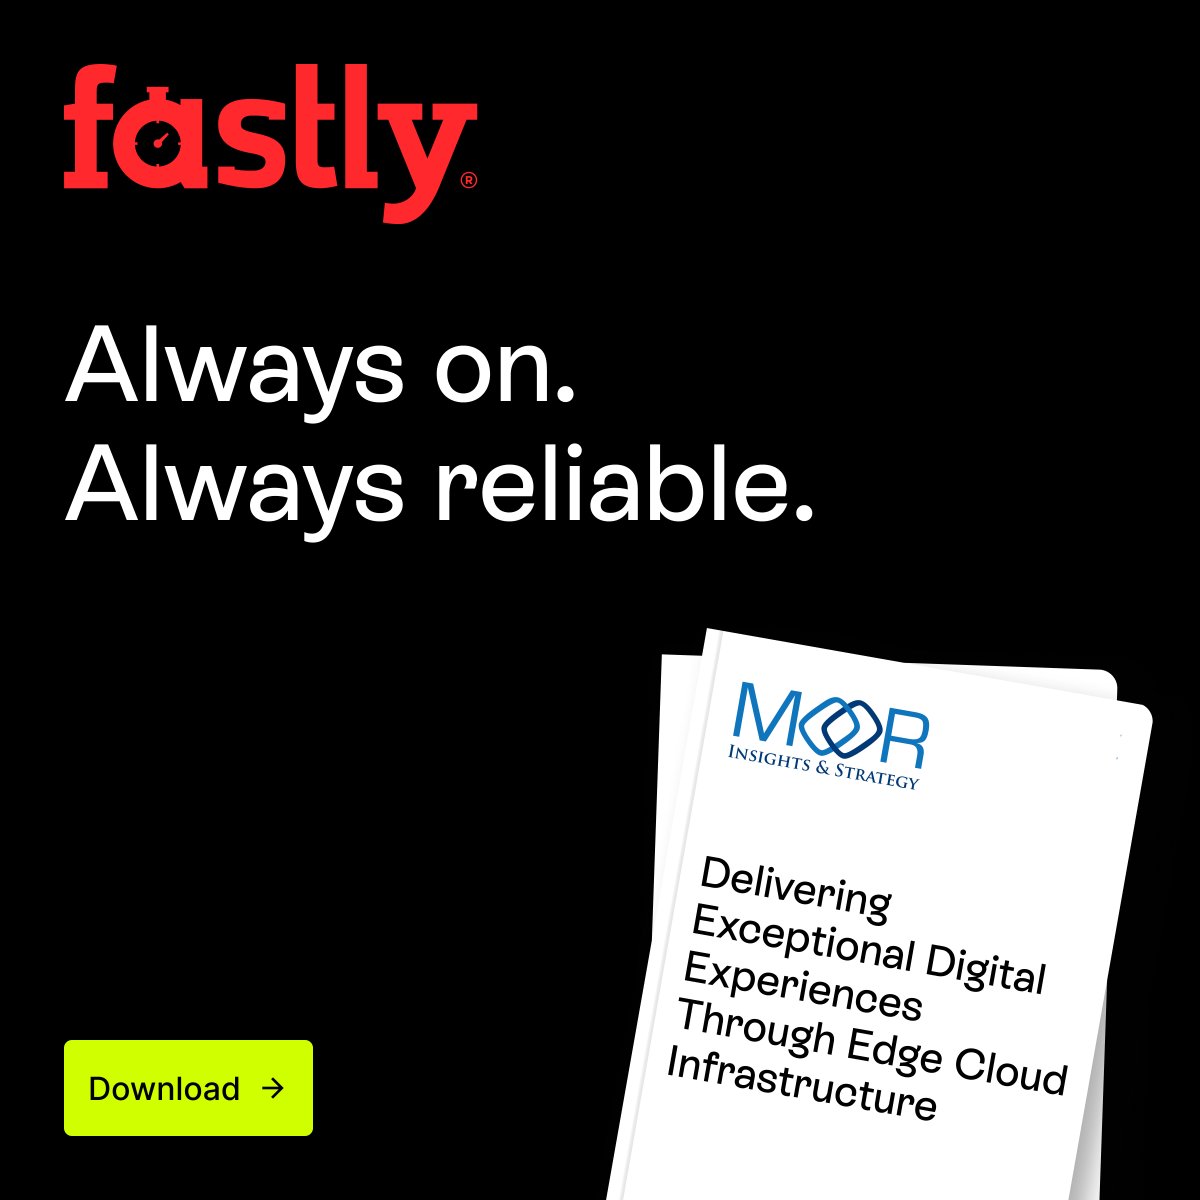 Network resiliency is the 🔑 key to digital success now and in the future. Gain insights into the critical importance of resilient infrastructure for maintaining business continuity & customer satisfaction. Download 👉 fastly.us/3QGTj6h